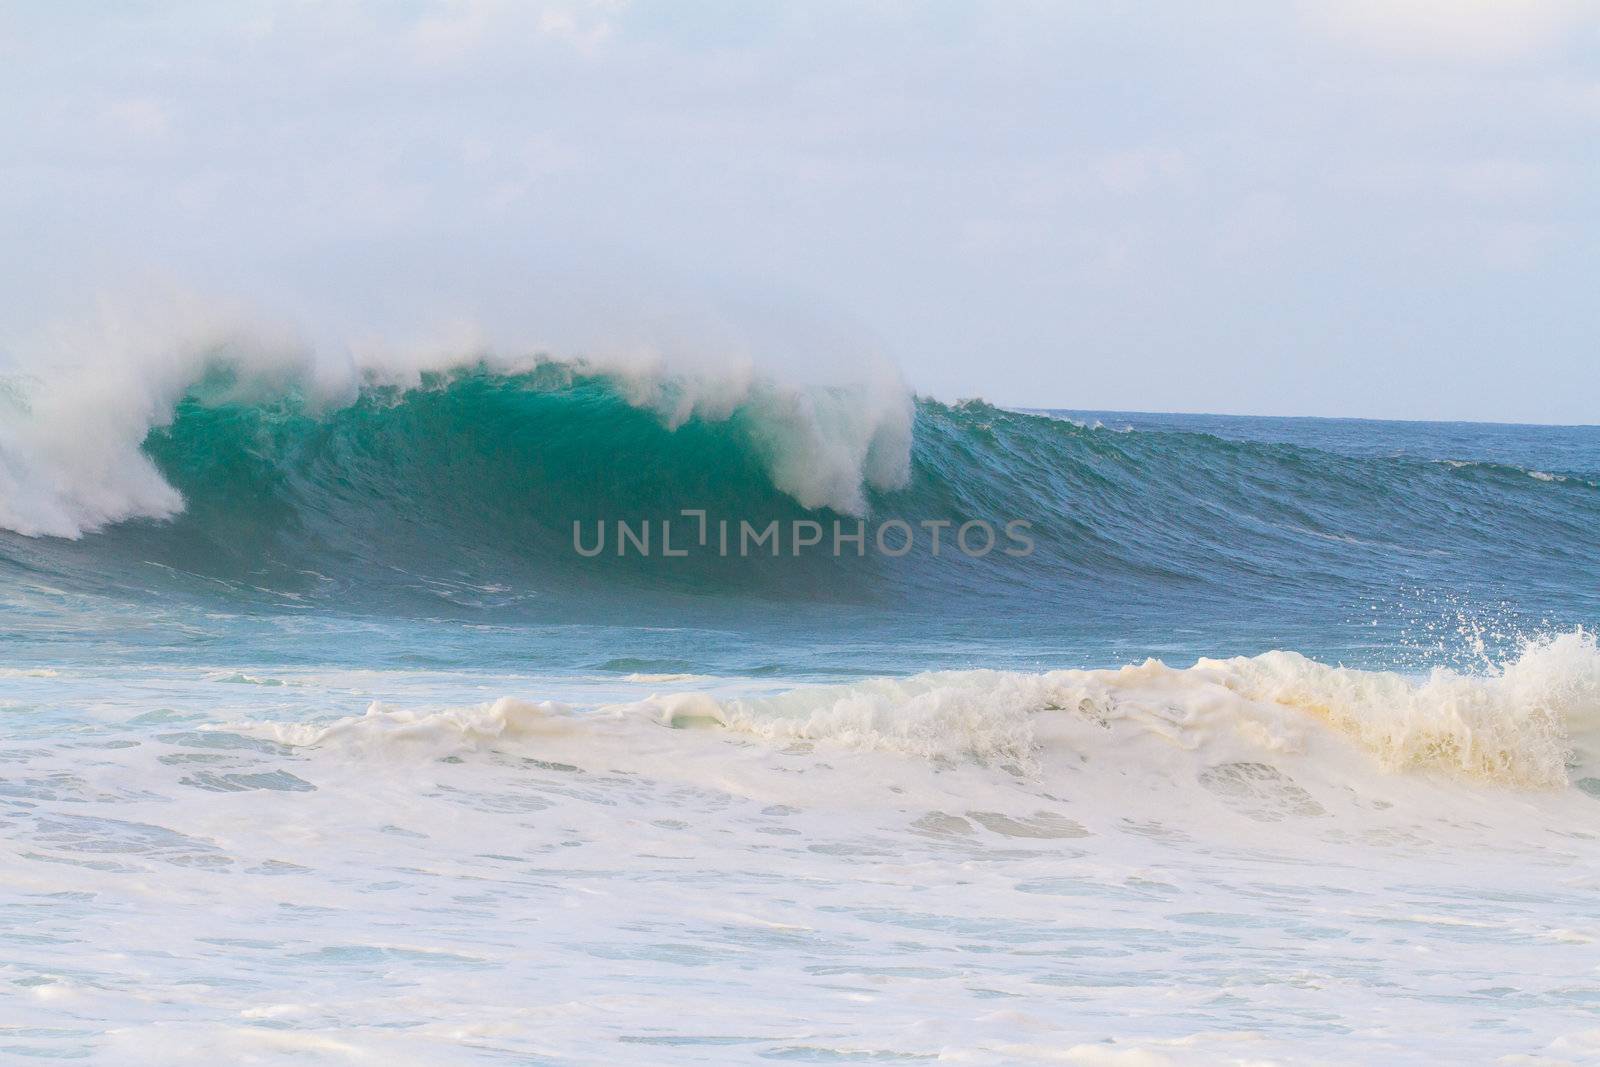 These huge waves with hollow barrels break off the north shore of Oahu in Hawaii during a big storm. These dangerous waves have major rip currents and a lot of power from the ocean but surfers are still lining up to surf.